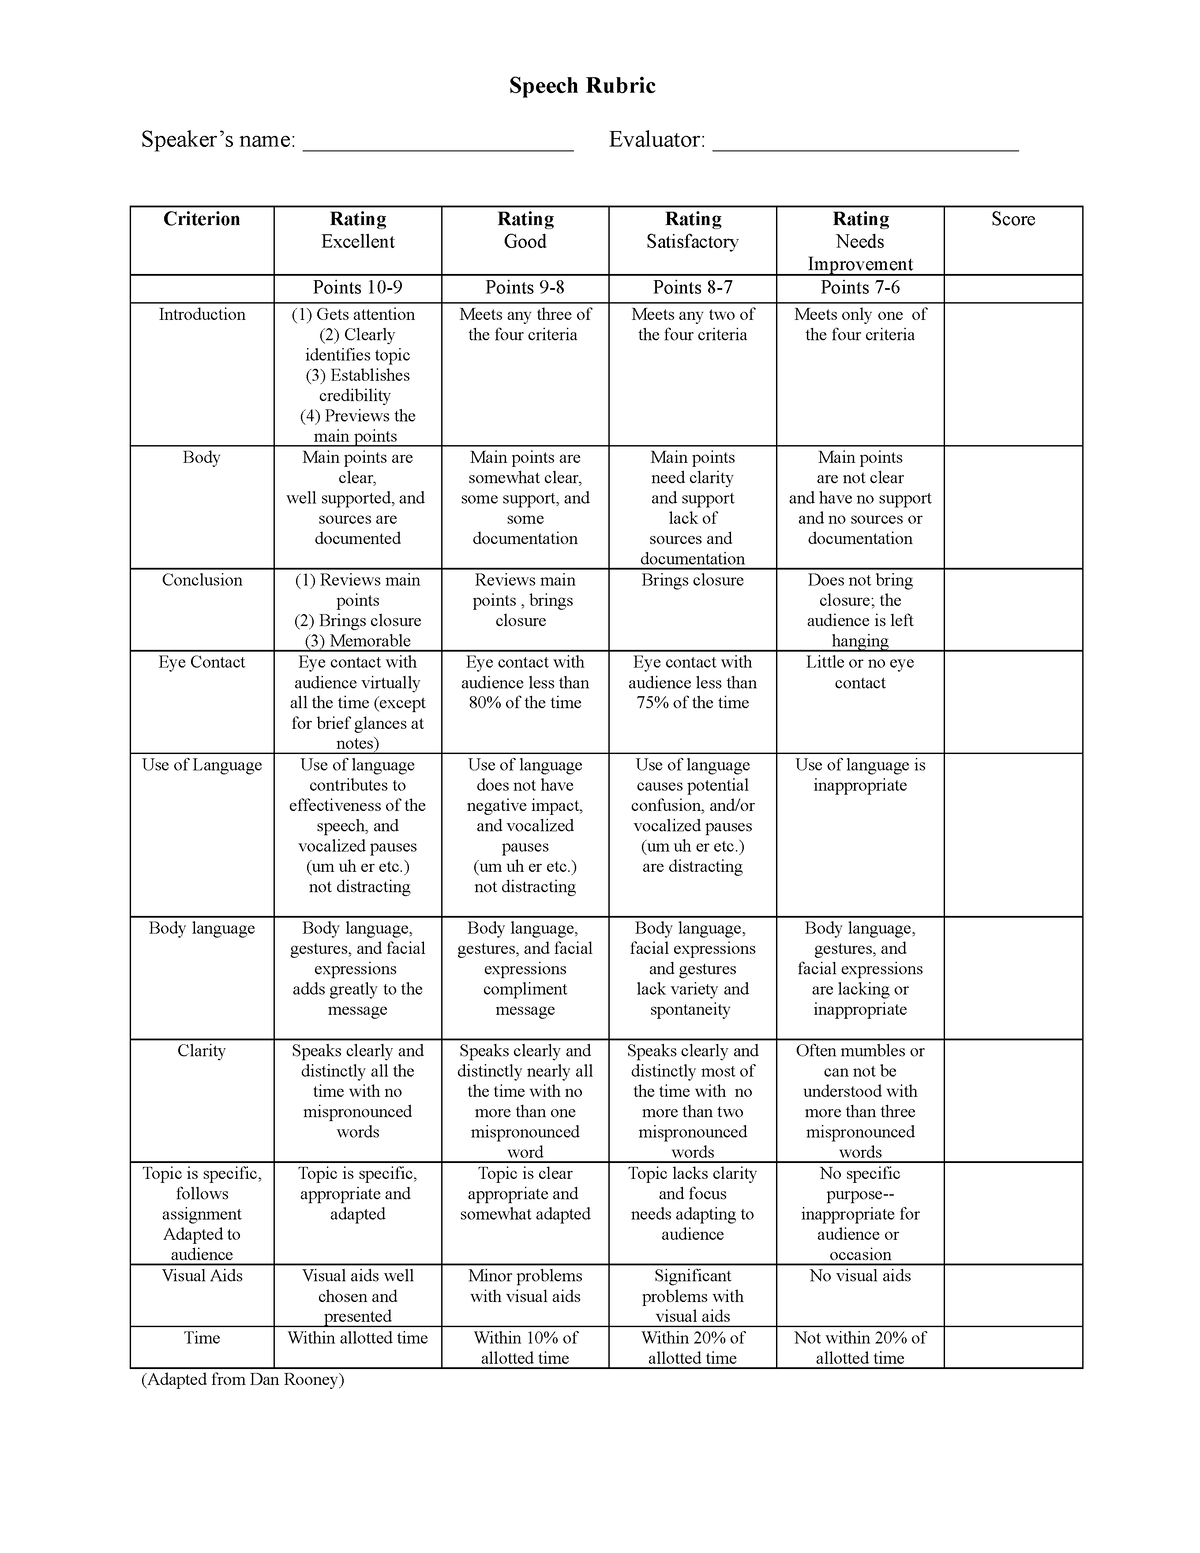 Speech Rubric Revised Helping others Speech Rubric Speaker’s name